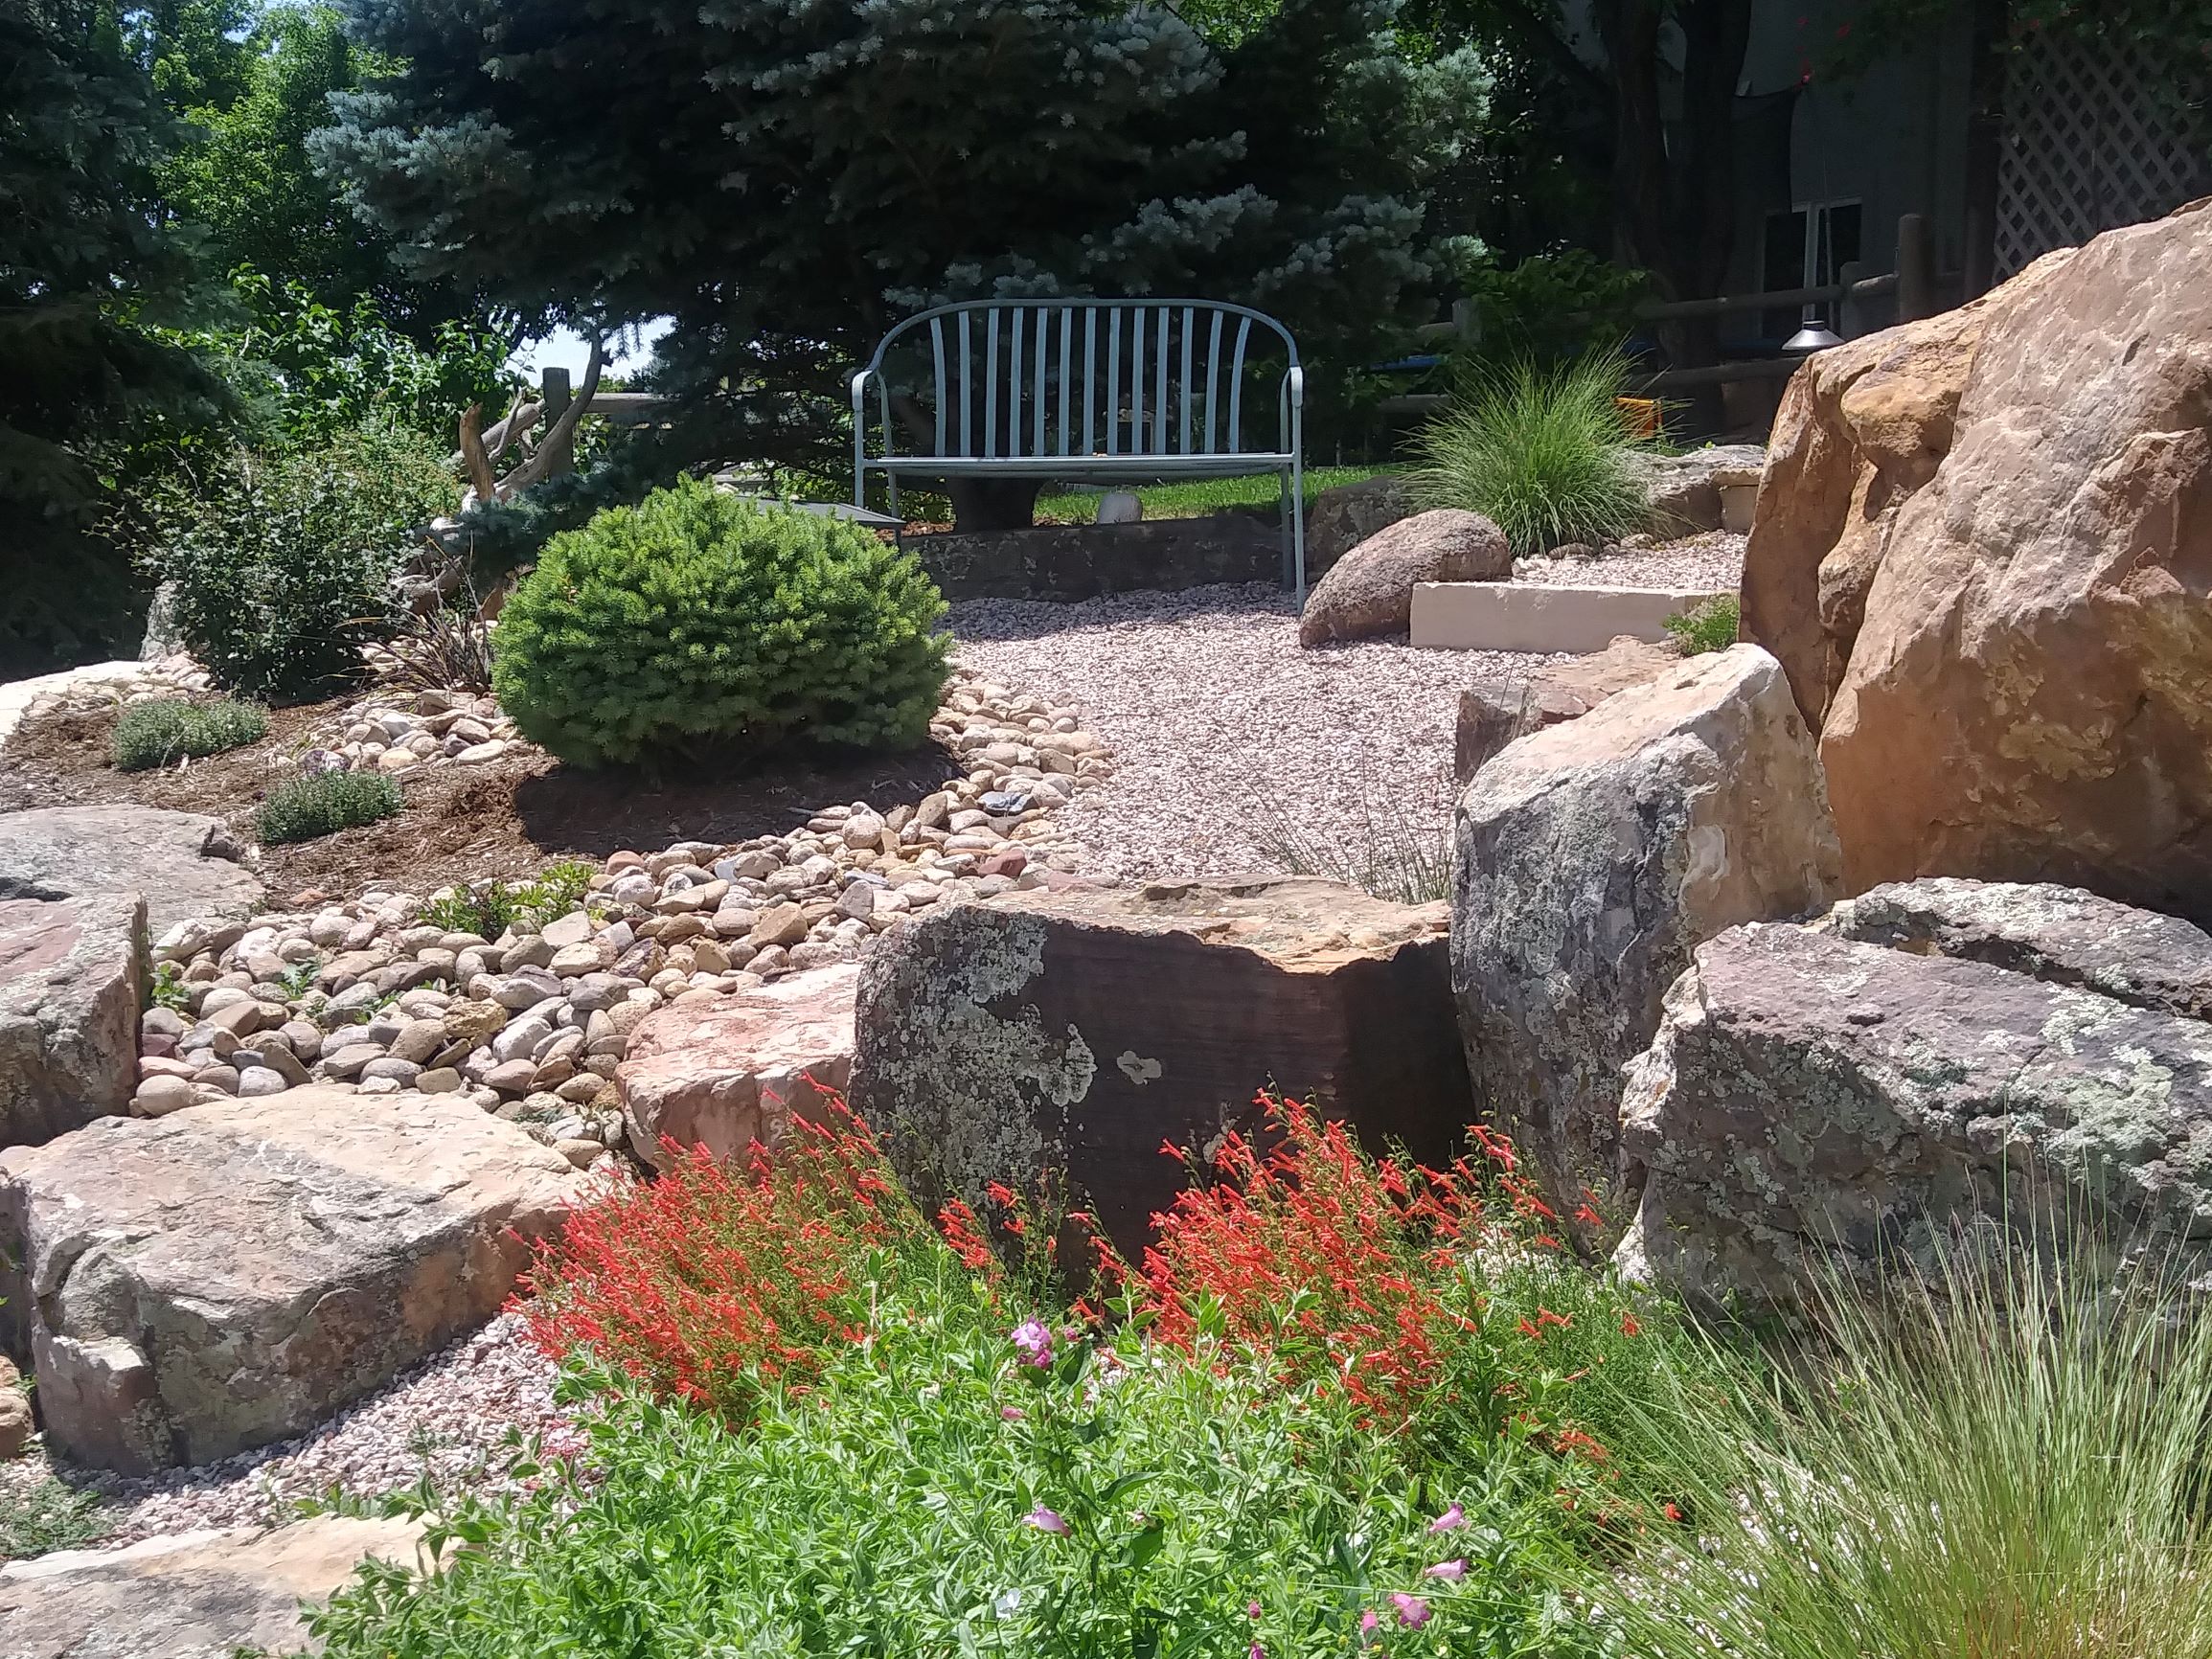 Gravel path leading to a bench. Bordered by large decorative rocks as well as bushes and plants.